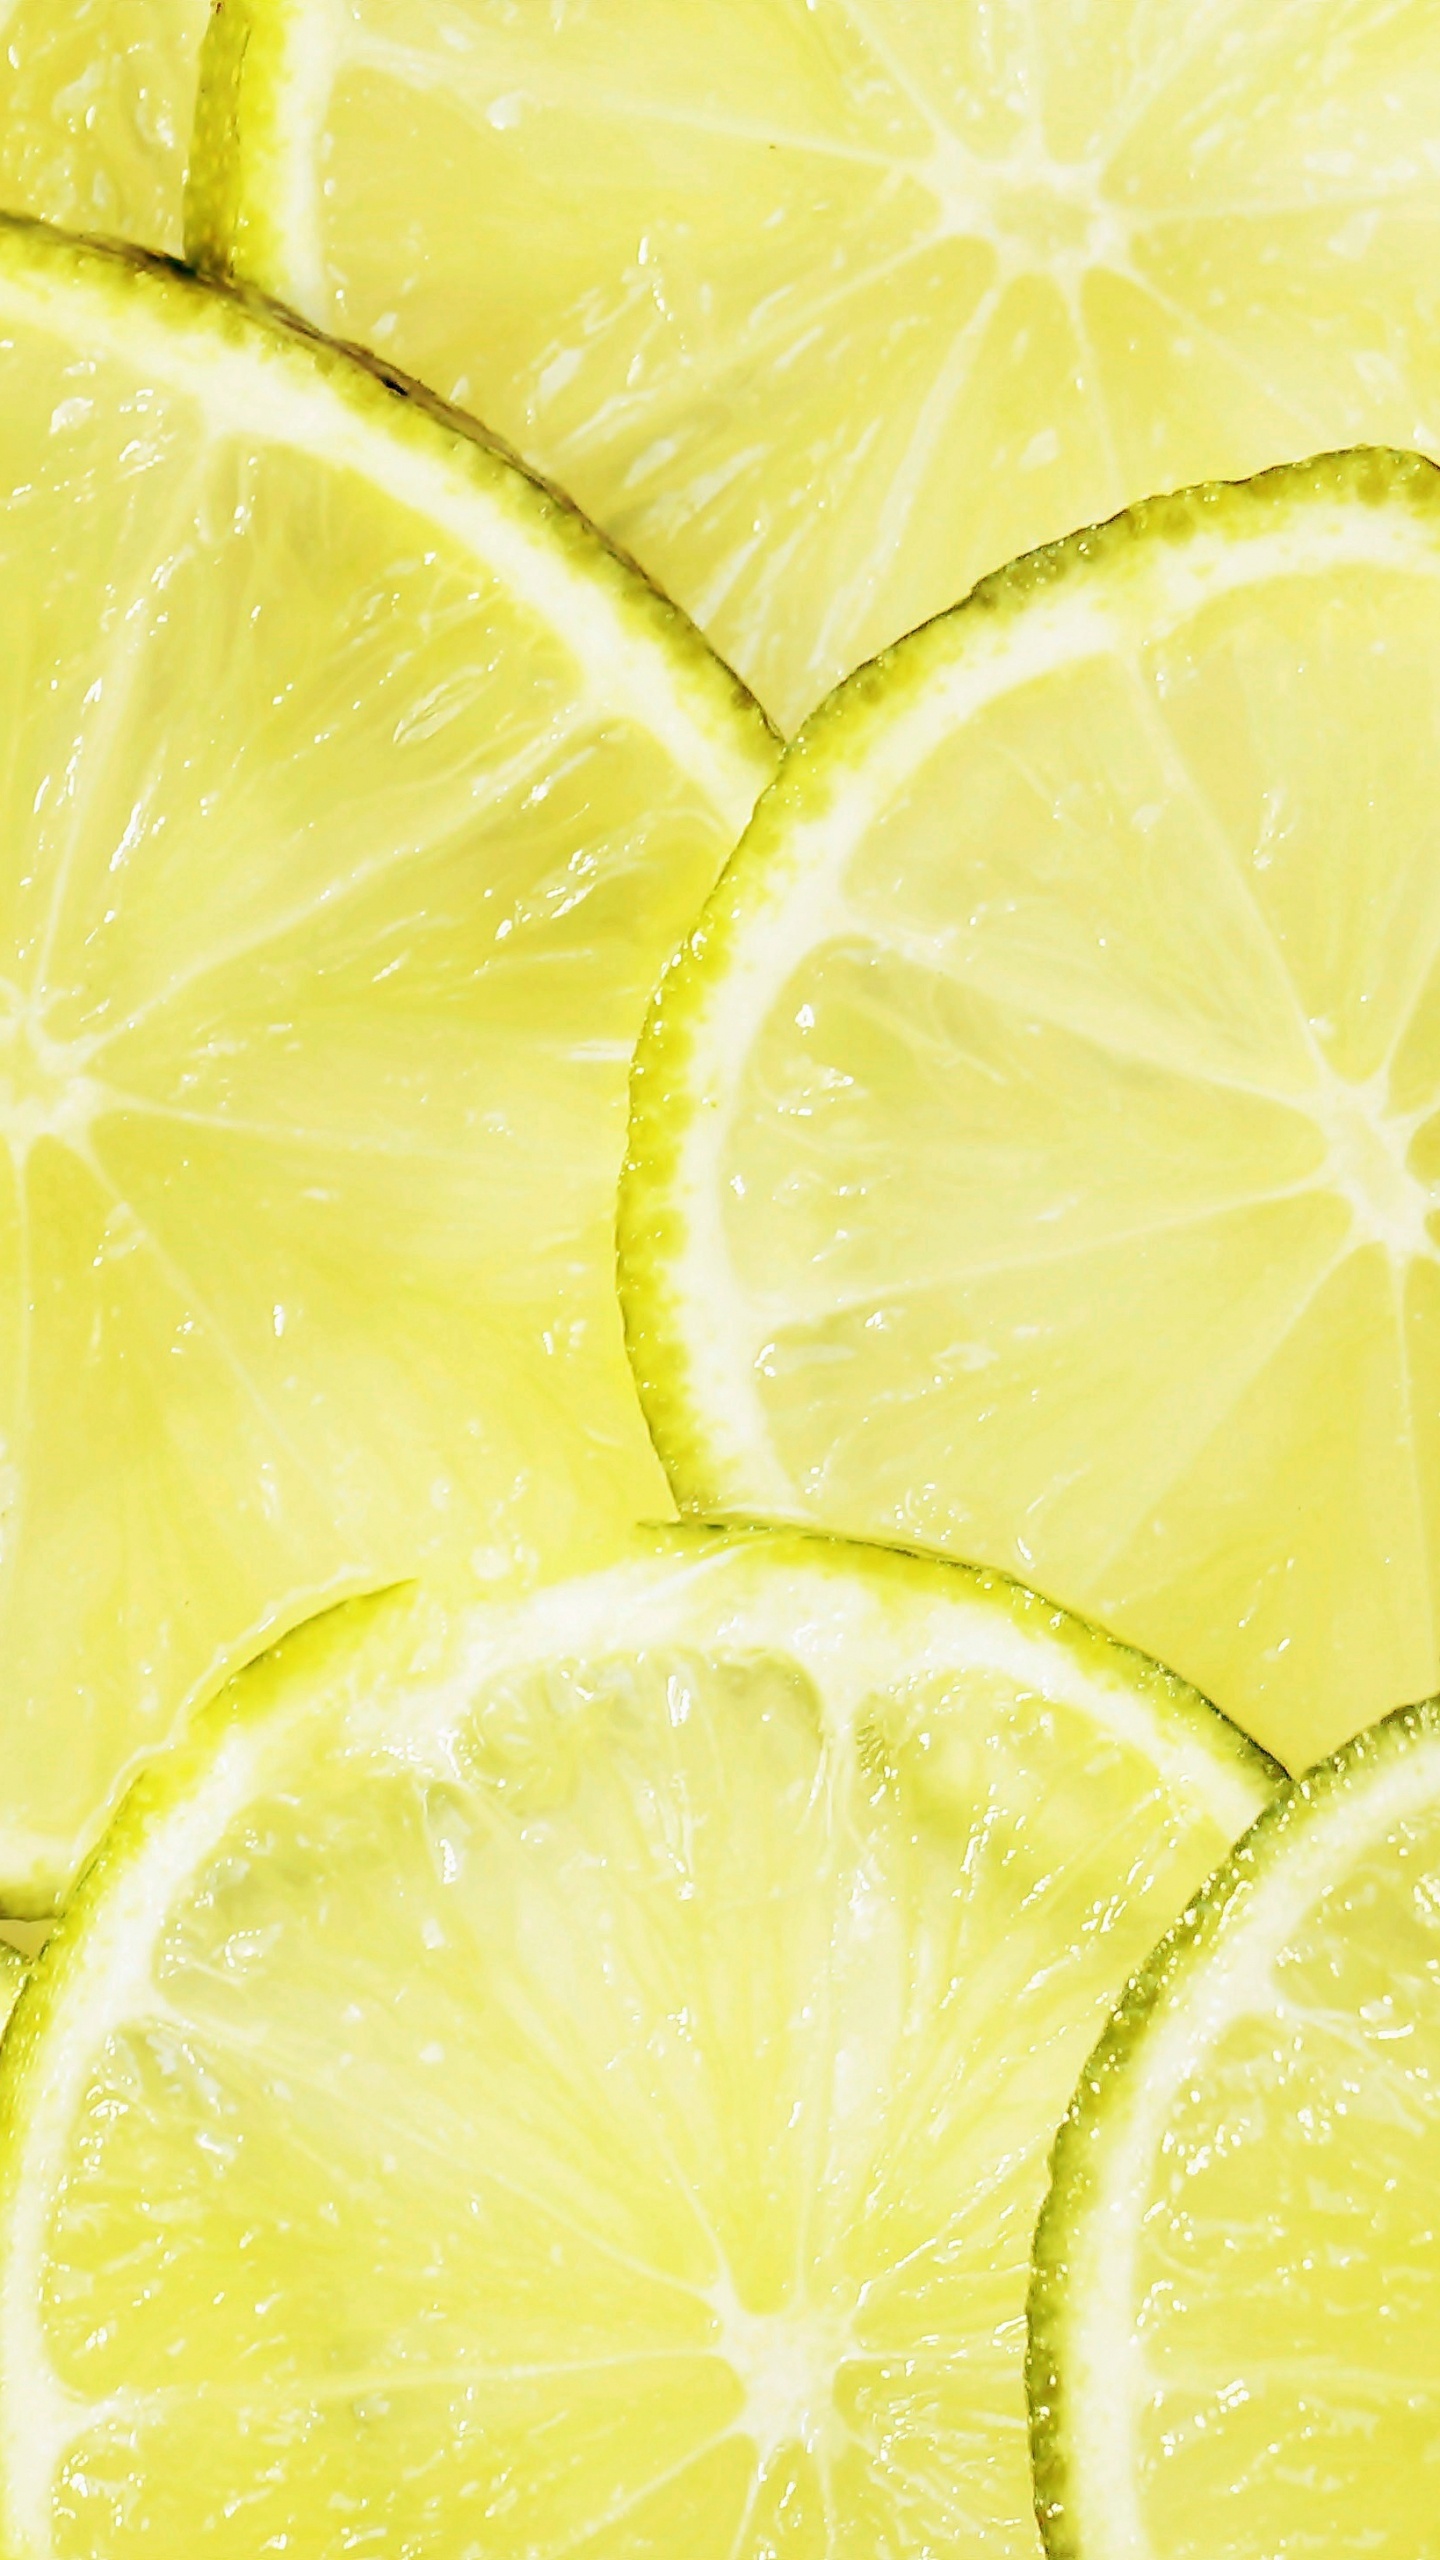 Yellow Lemon Fruit With Water Droplets. Wallpaper in 1440x2560 Resolution